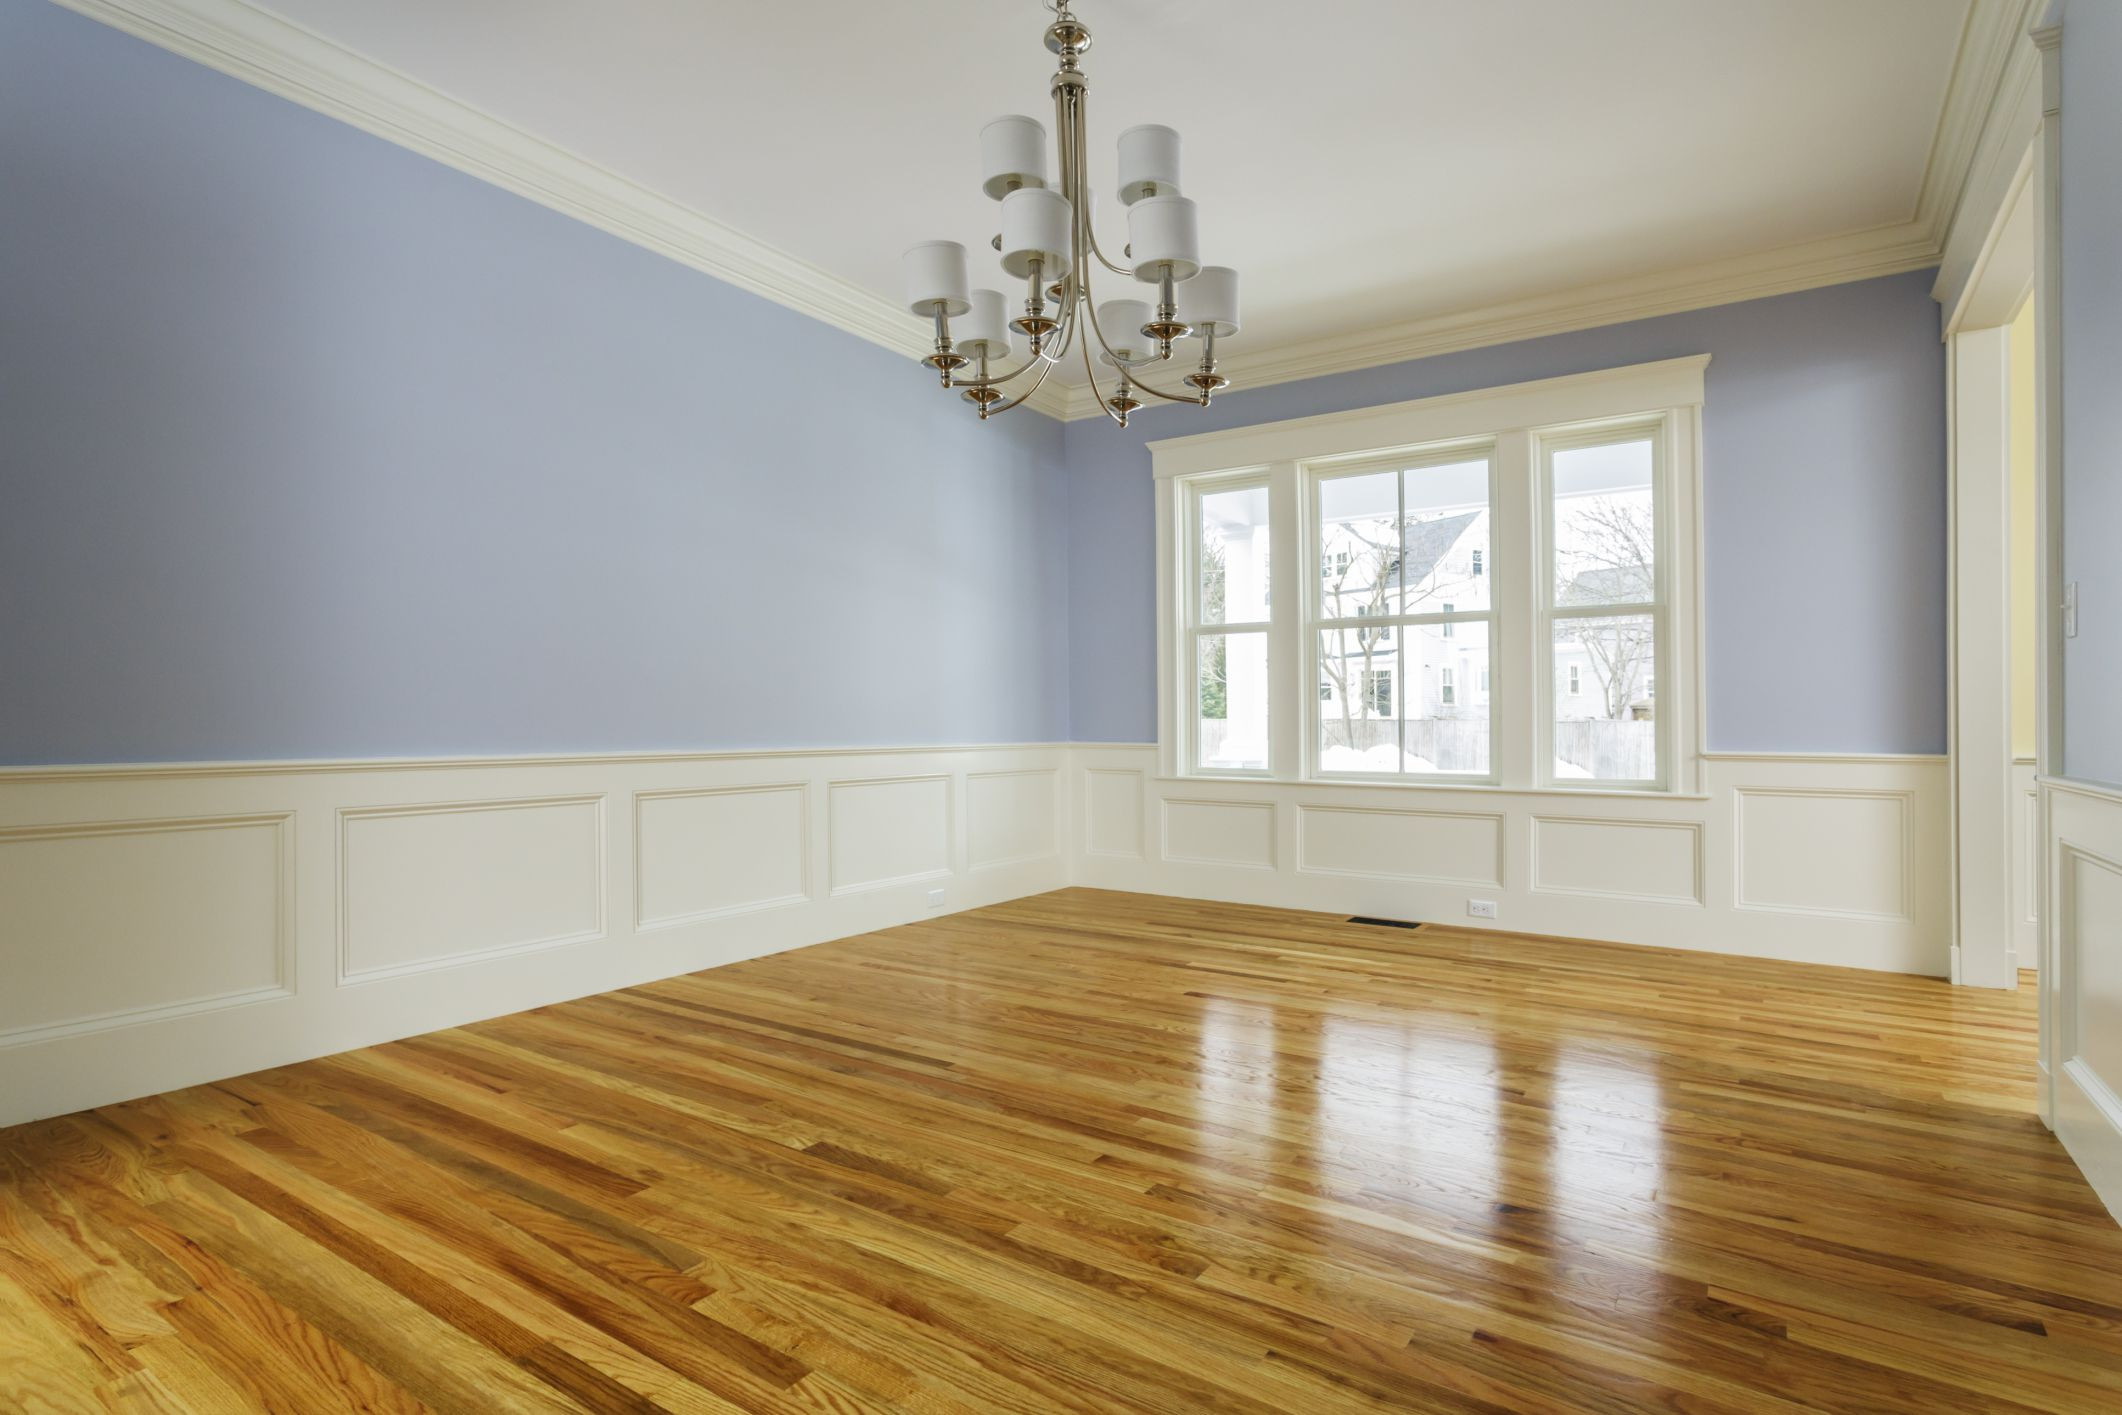 23 Elegant Cost to Pull Up Carpet and Refinish Hardwood Floors 2024 free download cost to pull up carpet and refinish hardwood floors of the cost to refinish hardwood floors with 168686572 highres 56a2fd773df78cf7727b6cb3